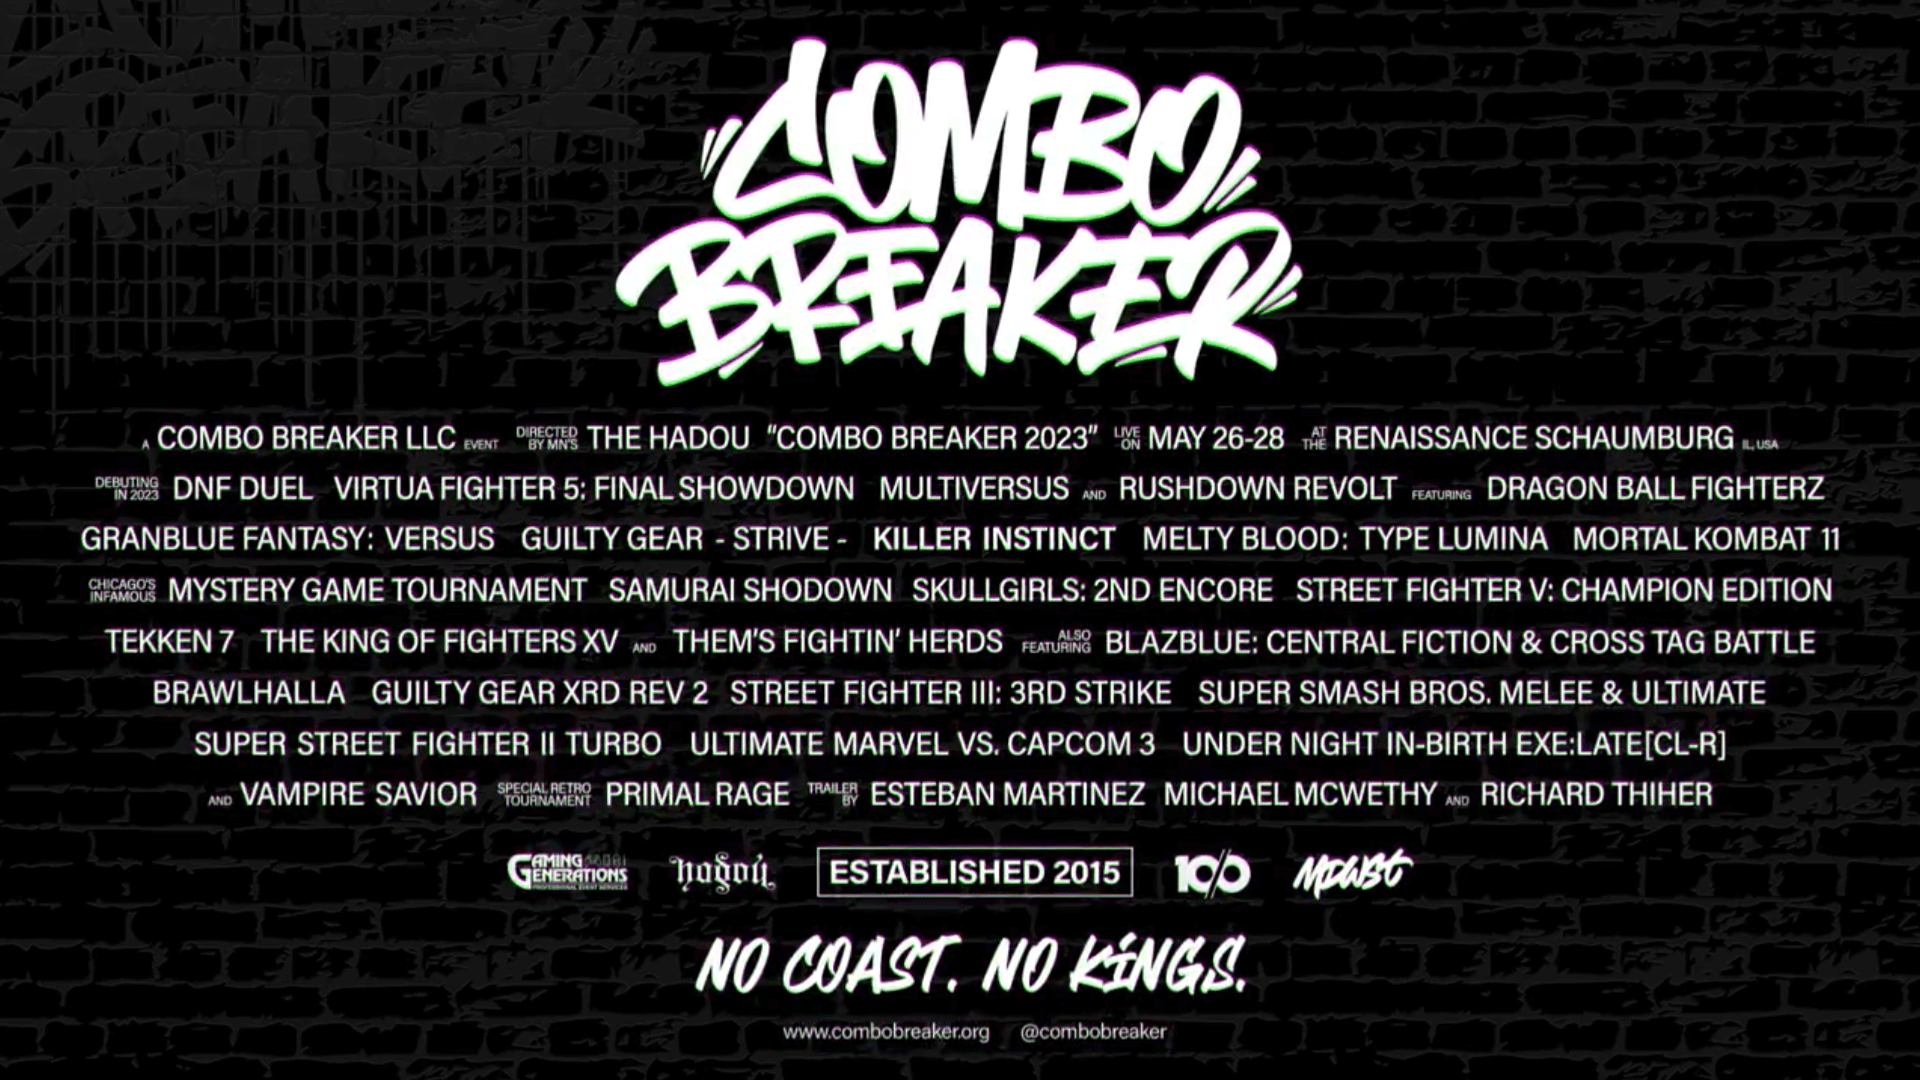 Combo Breaker 2023: Announces Games Lineup, Dates, and Location